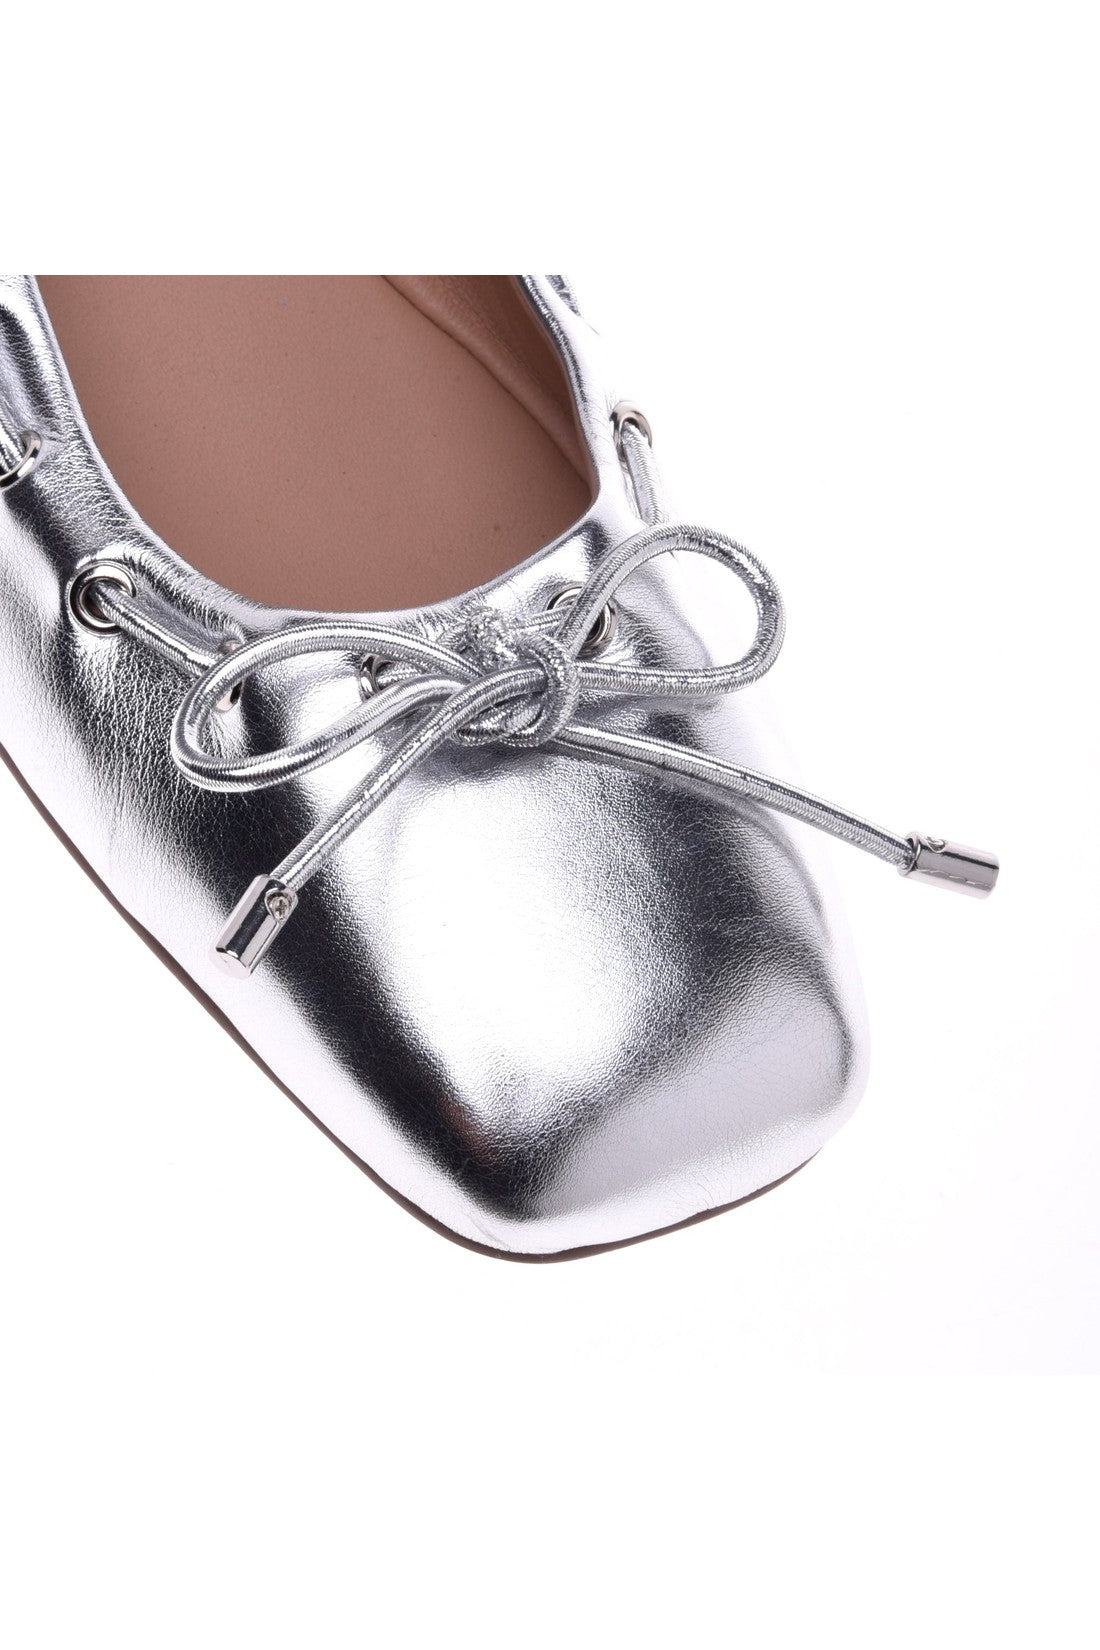 BALDININI-OUTLET-SALE-Ballerina-pump-in-silver-laminated-nappa-leather-Halbschuhe-ARCHIVE-COLLECTION-4.jpg